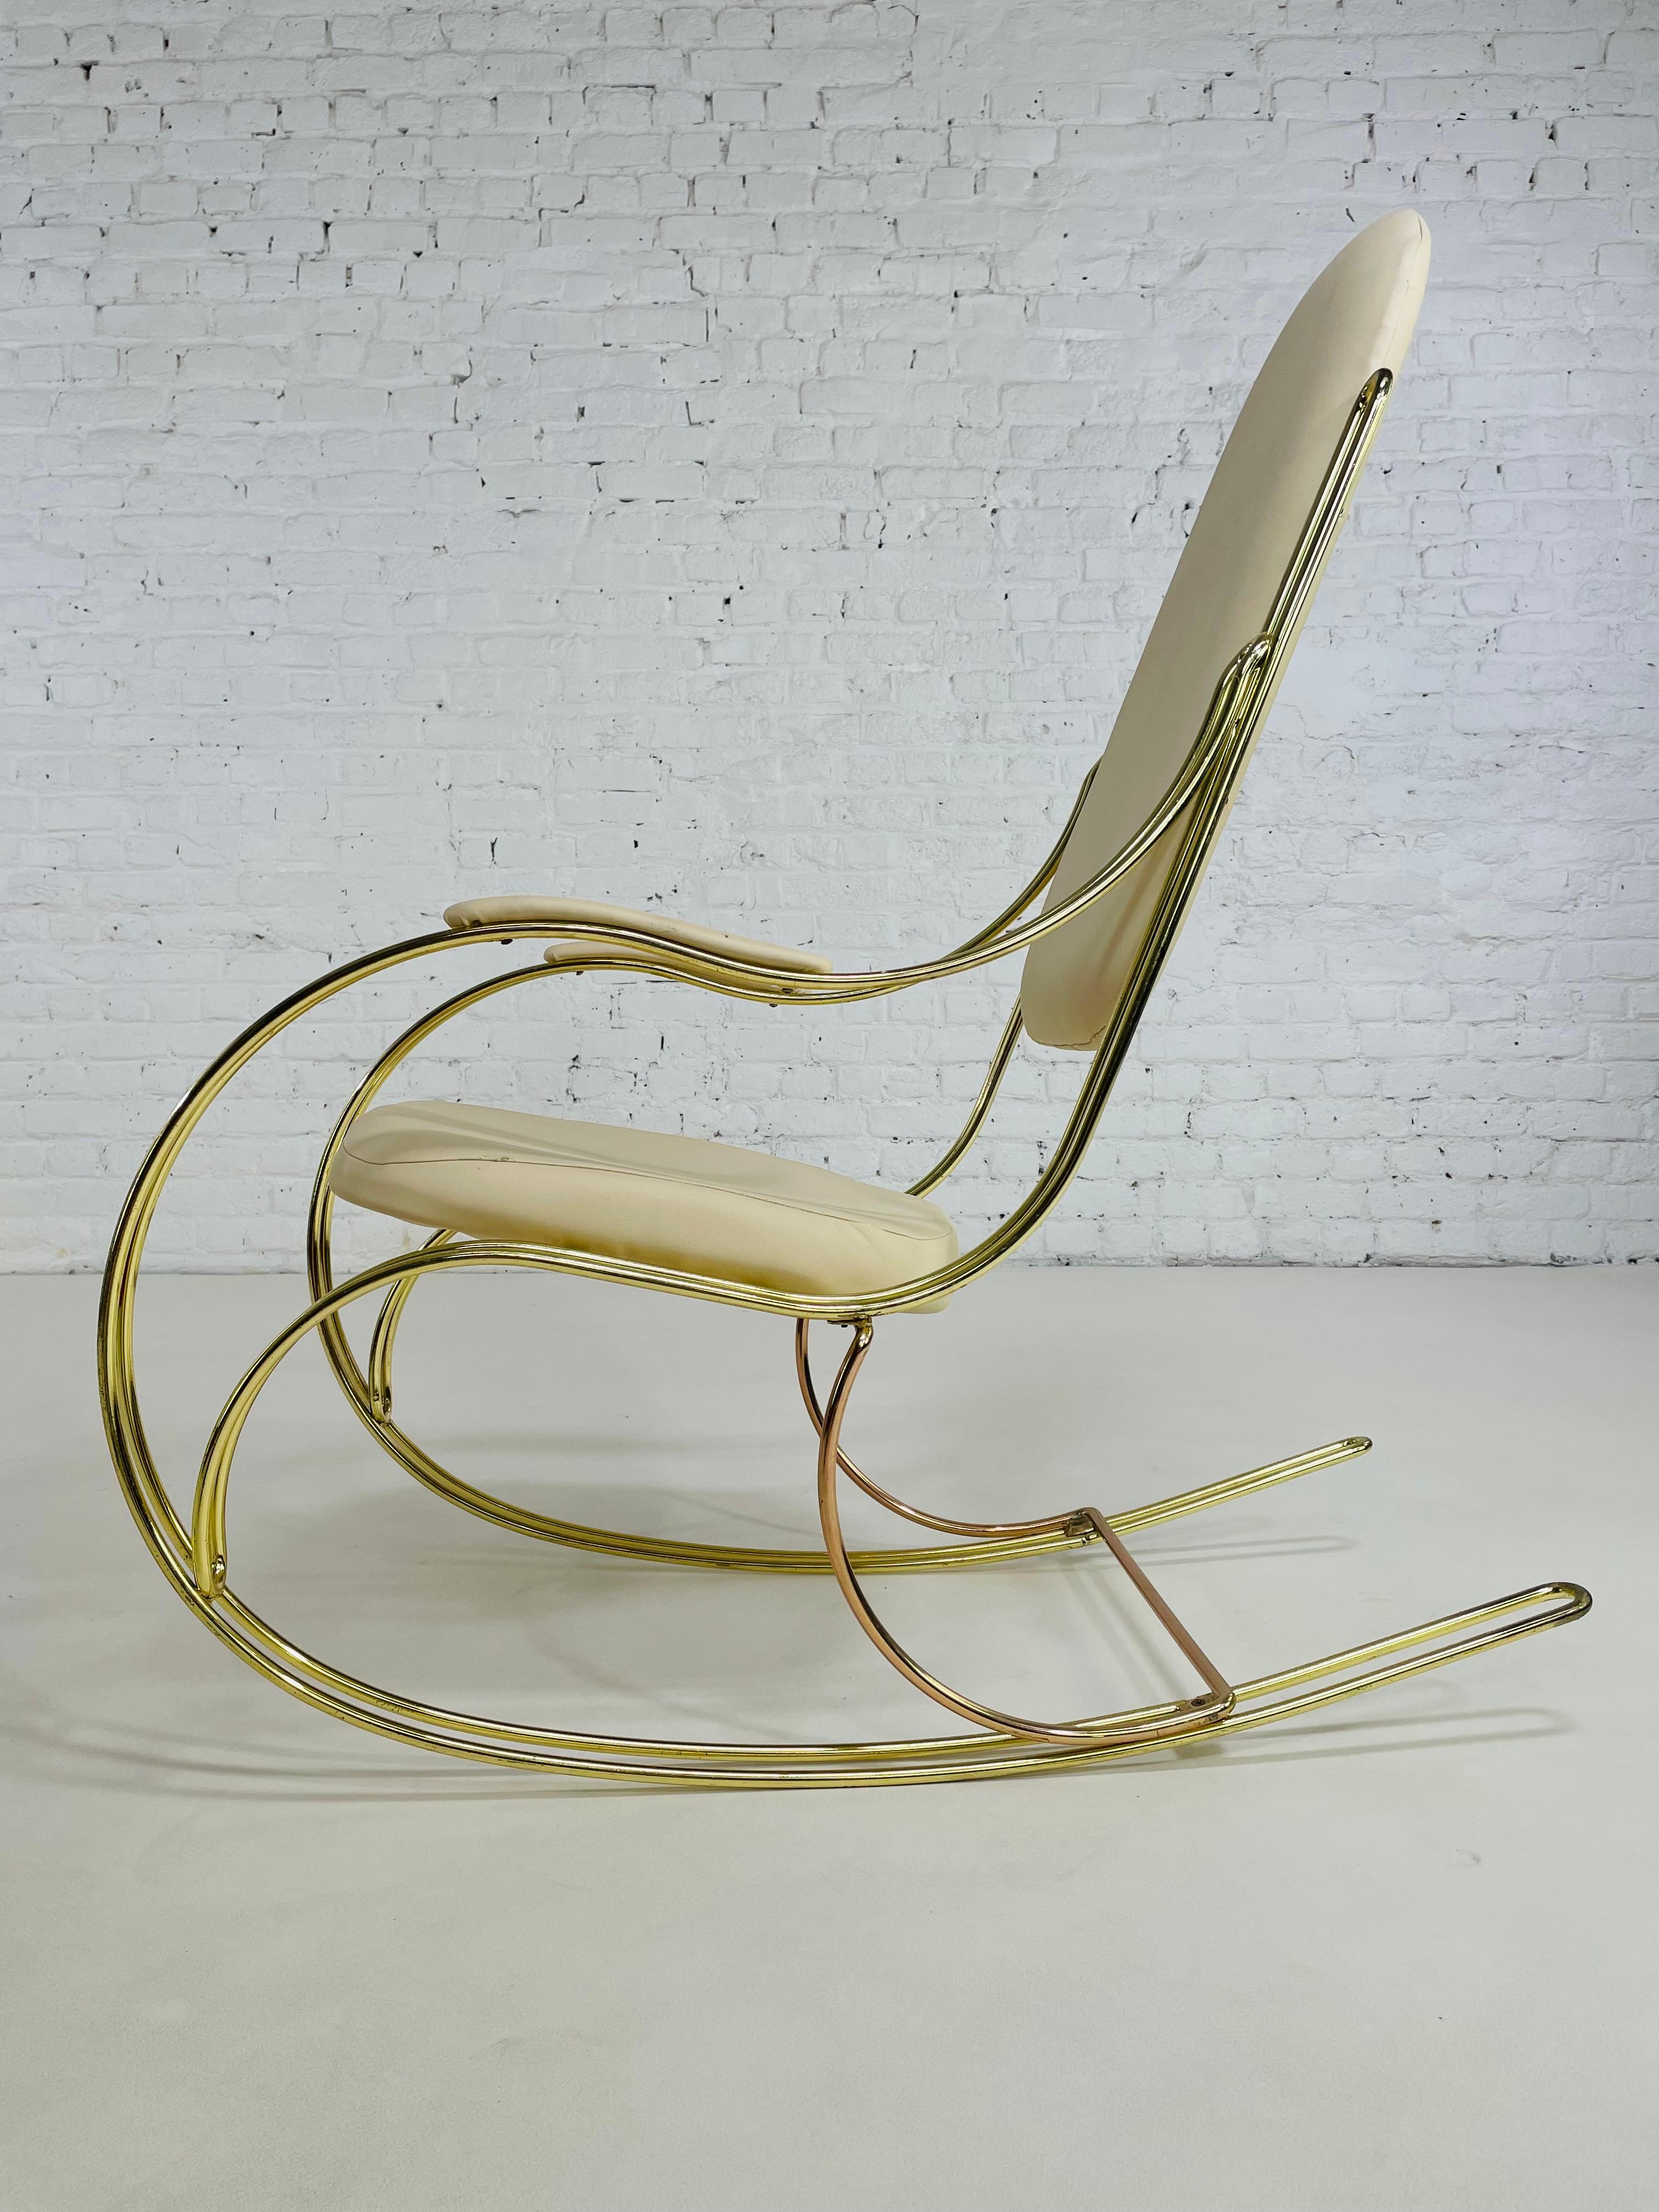 1960s-1970s Brass And Beige Faux Leather Rocking Chair For Sale 6